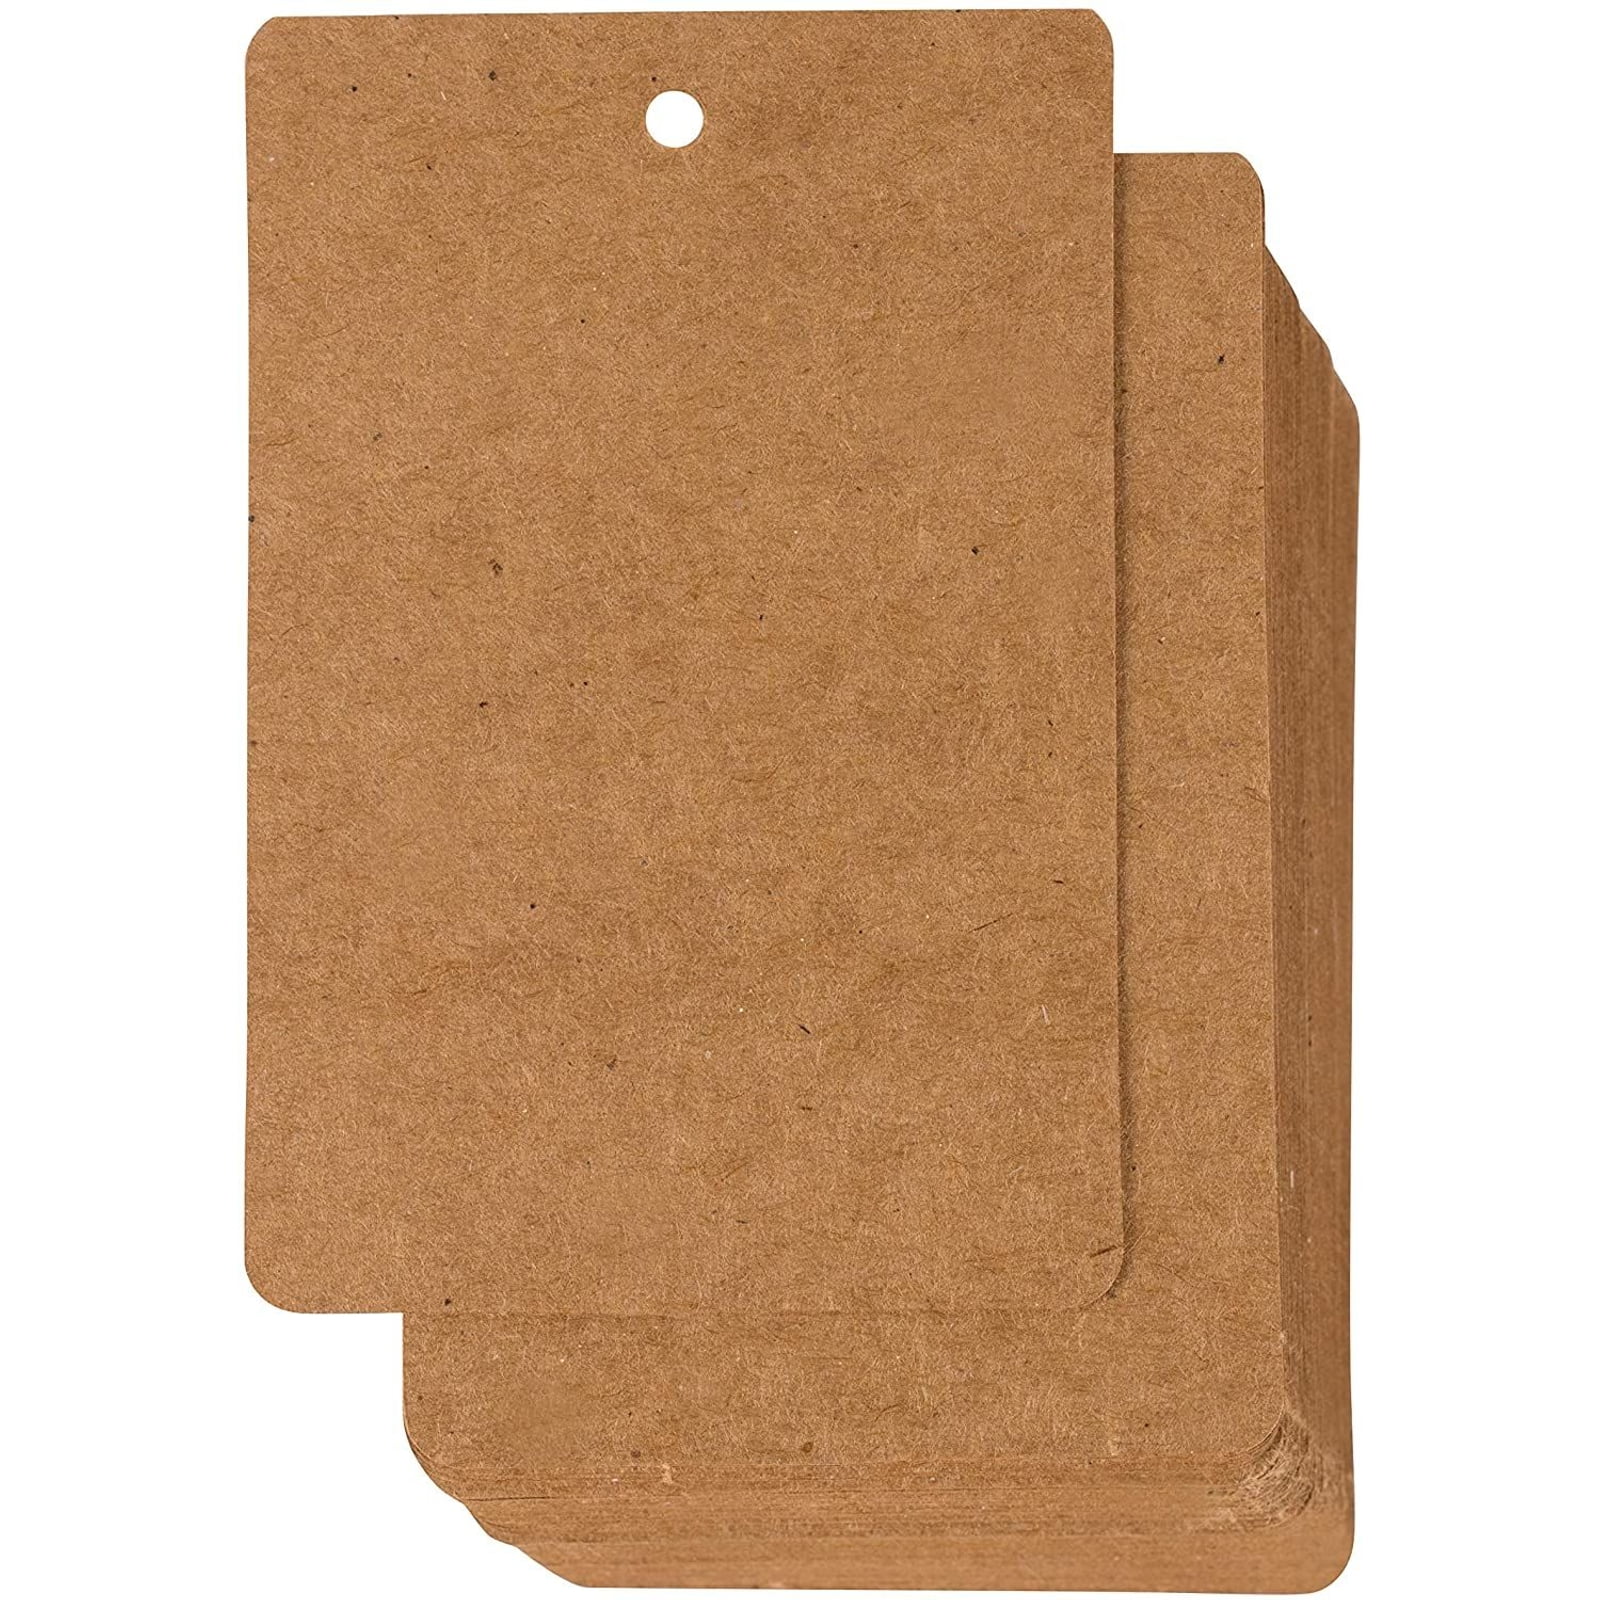 50 Kraft Blank Paper Price Hang Tags Label Cards Party Favors  Tool  HOT